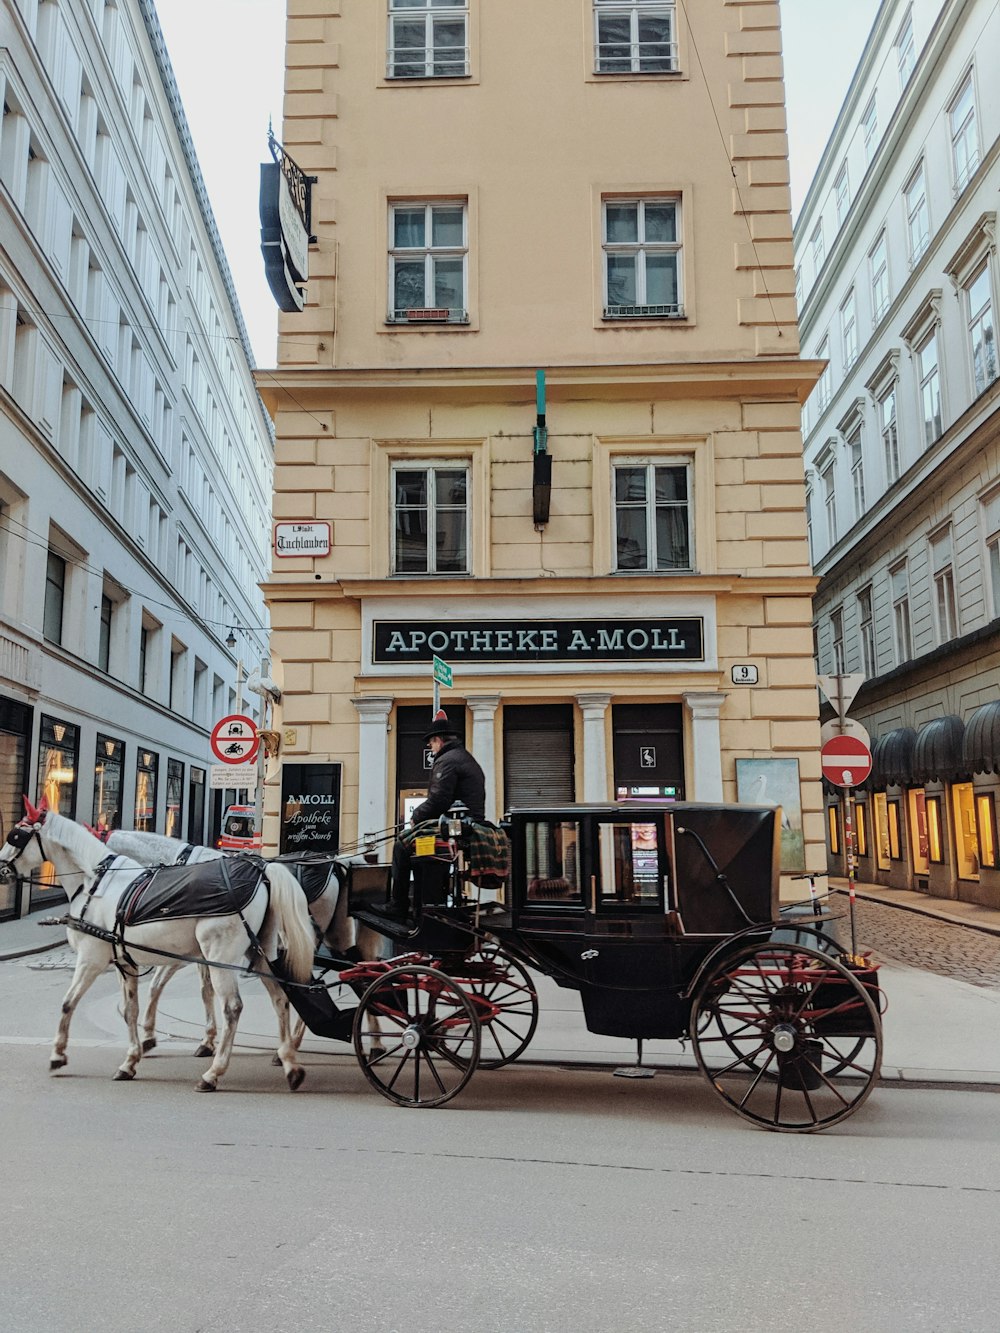 man riding carriage with horse on roadway beside building